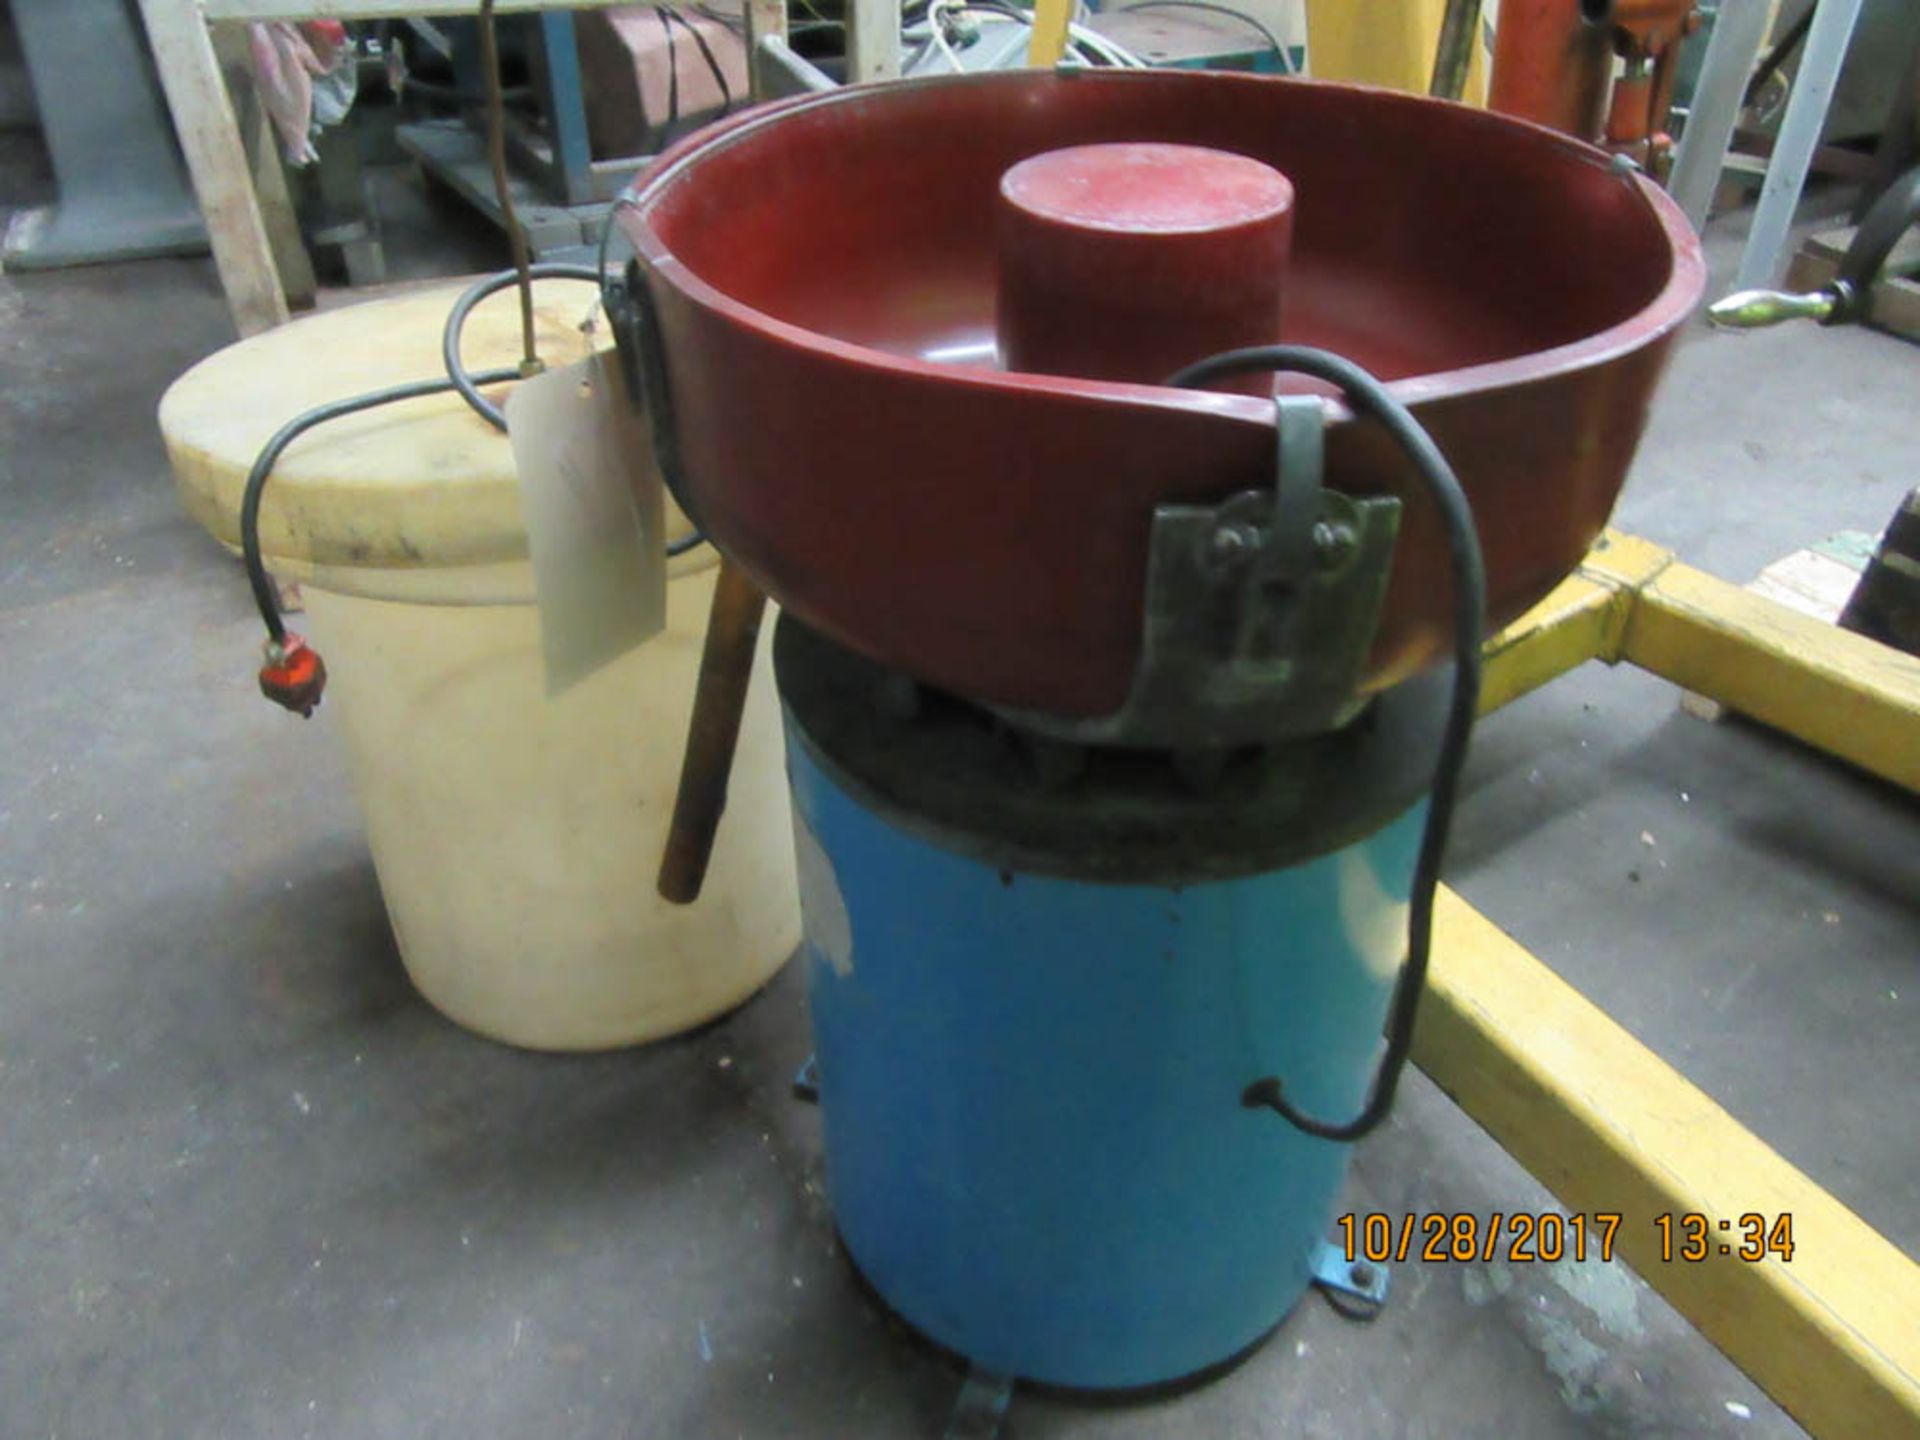 BEL-AIR MDL. FM-2000 1/2 CUBIC FOOT VIBRATORY TUMBLING / DEBURRING MACHINE, WITH STORAGE TANK & - Image 5 of 7